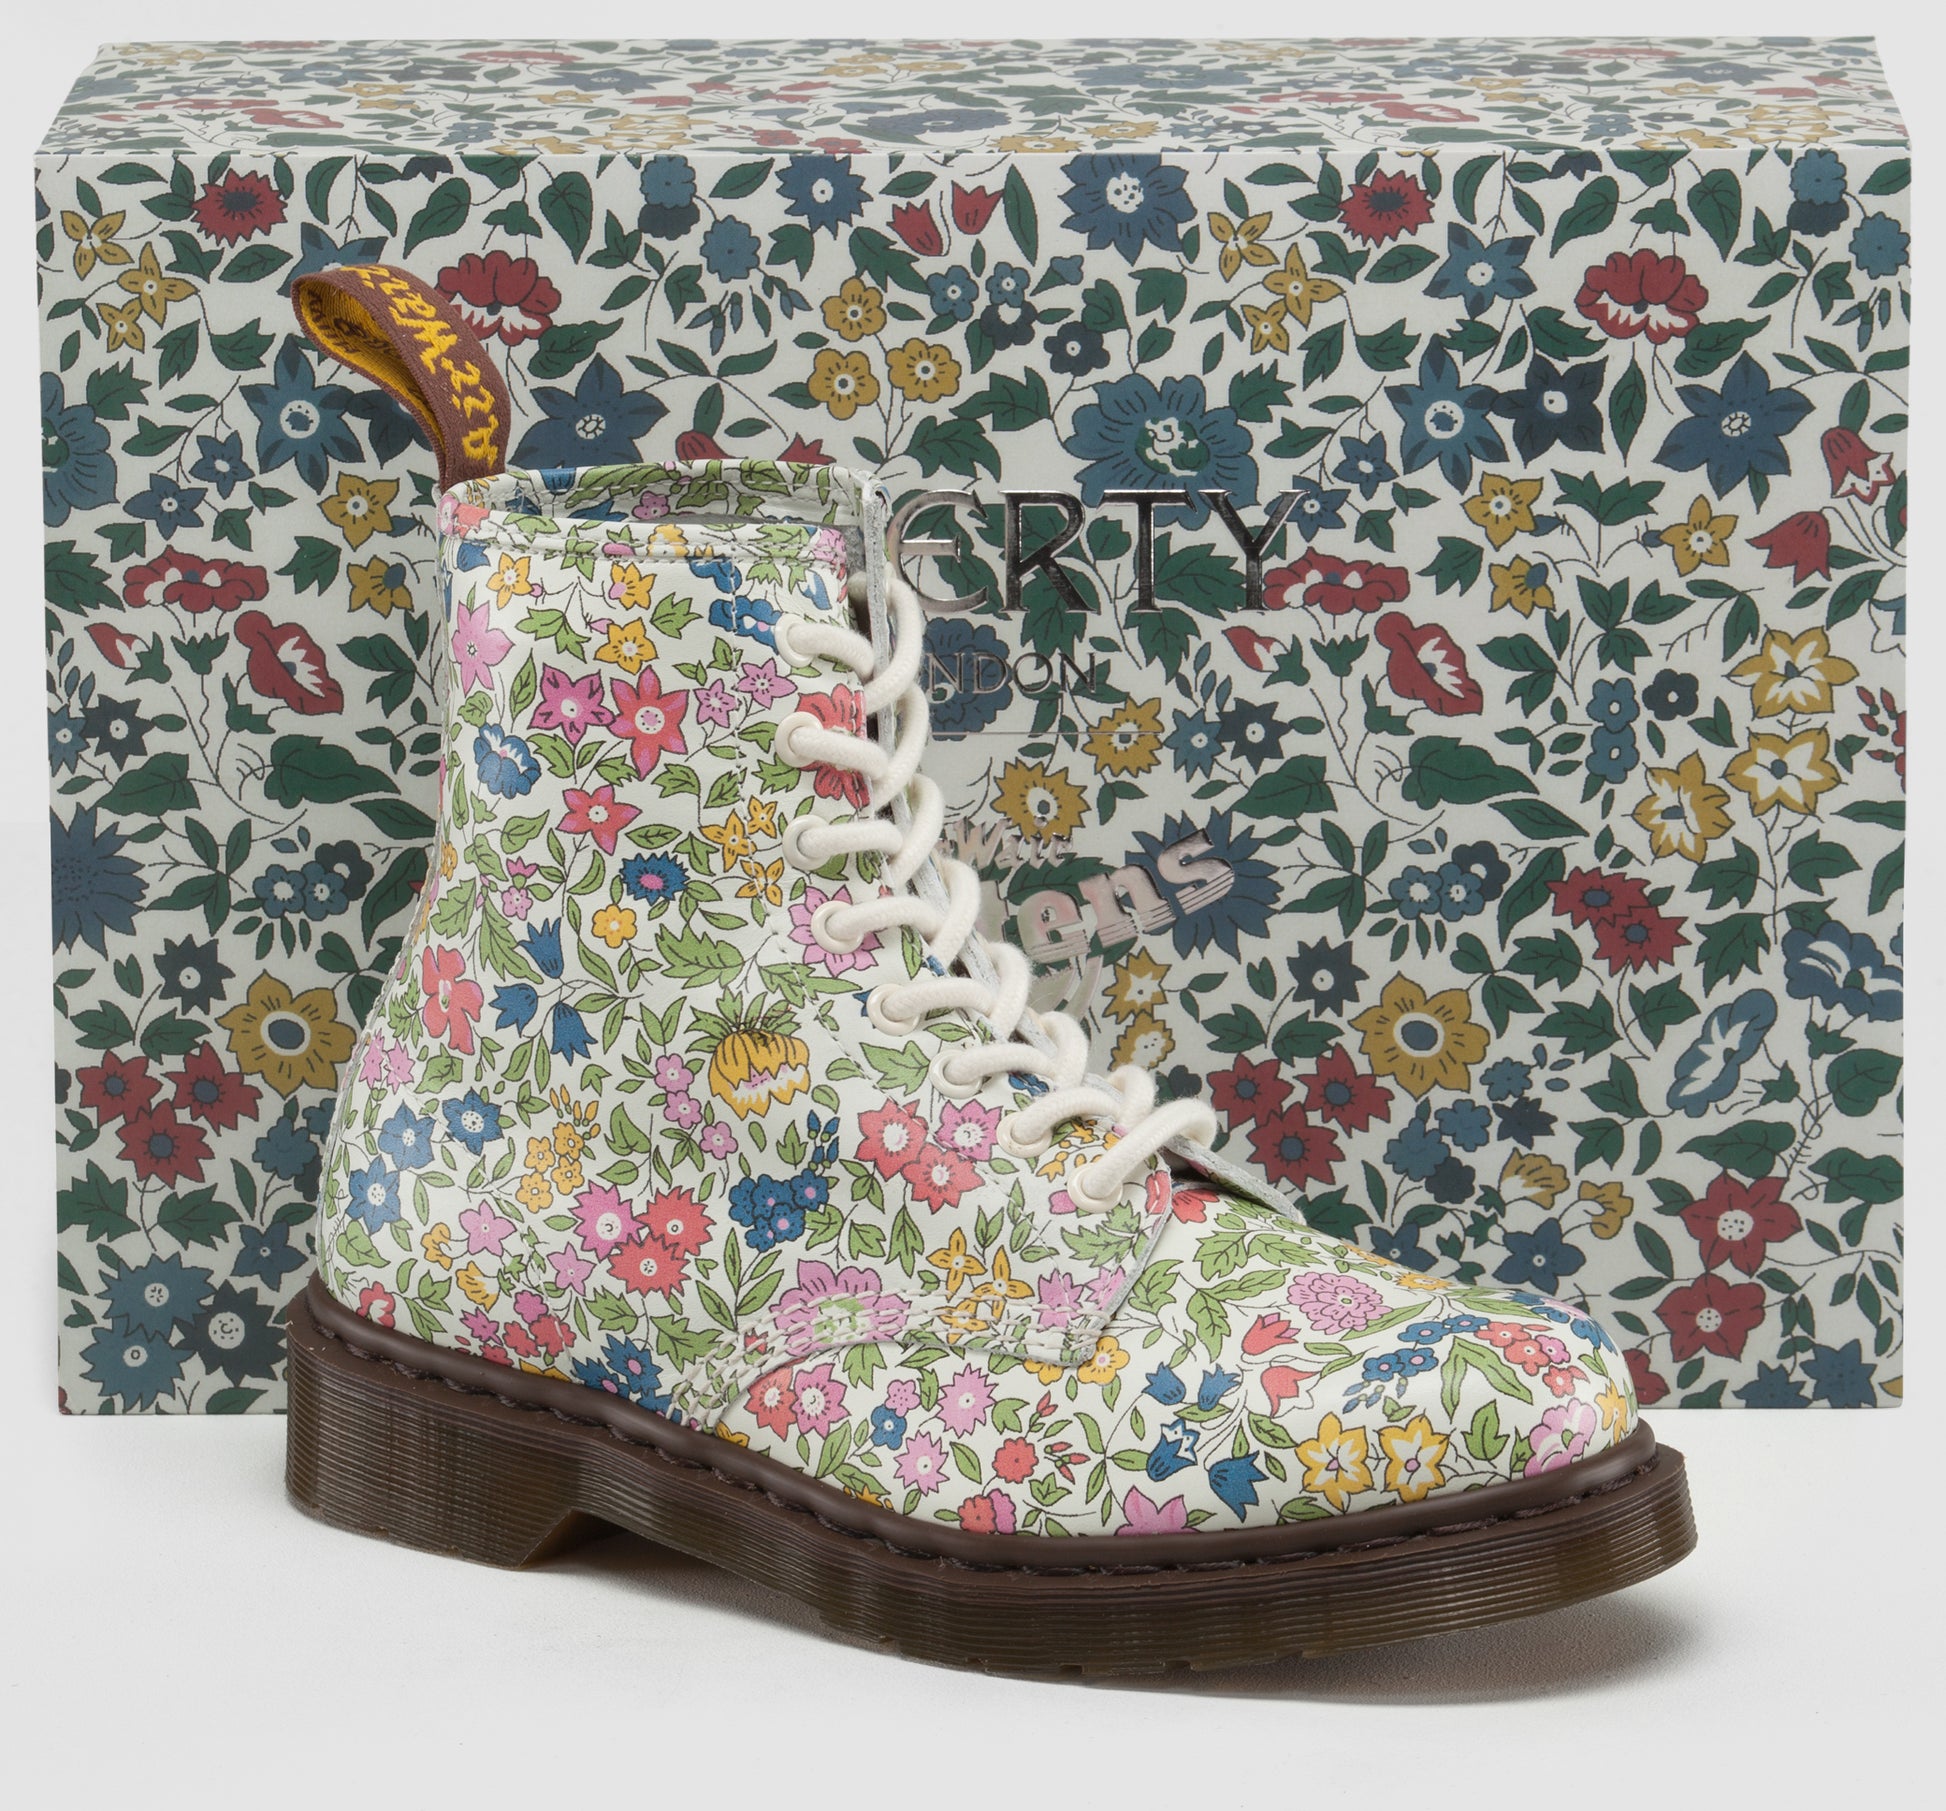 1460 LIBERTY FLOWER LEATHER BOOT